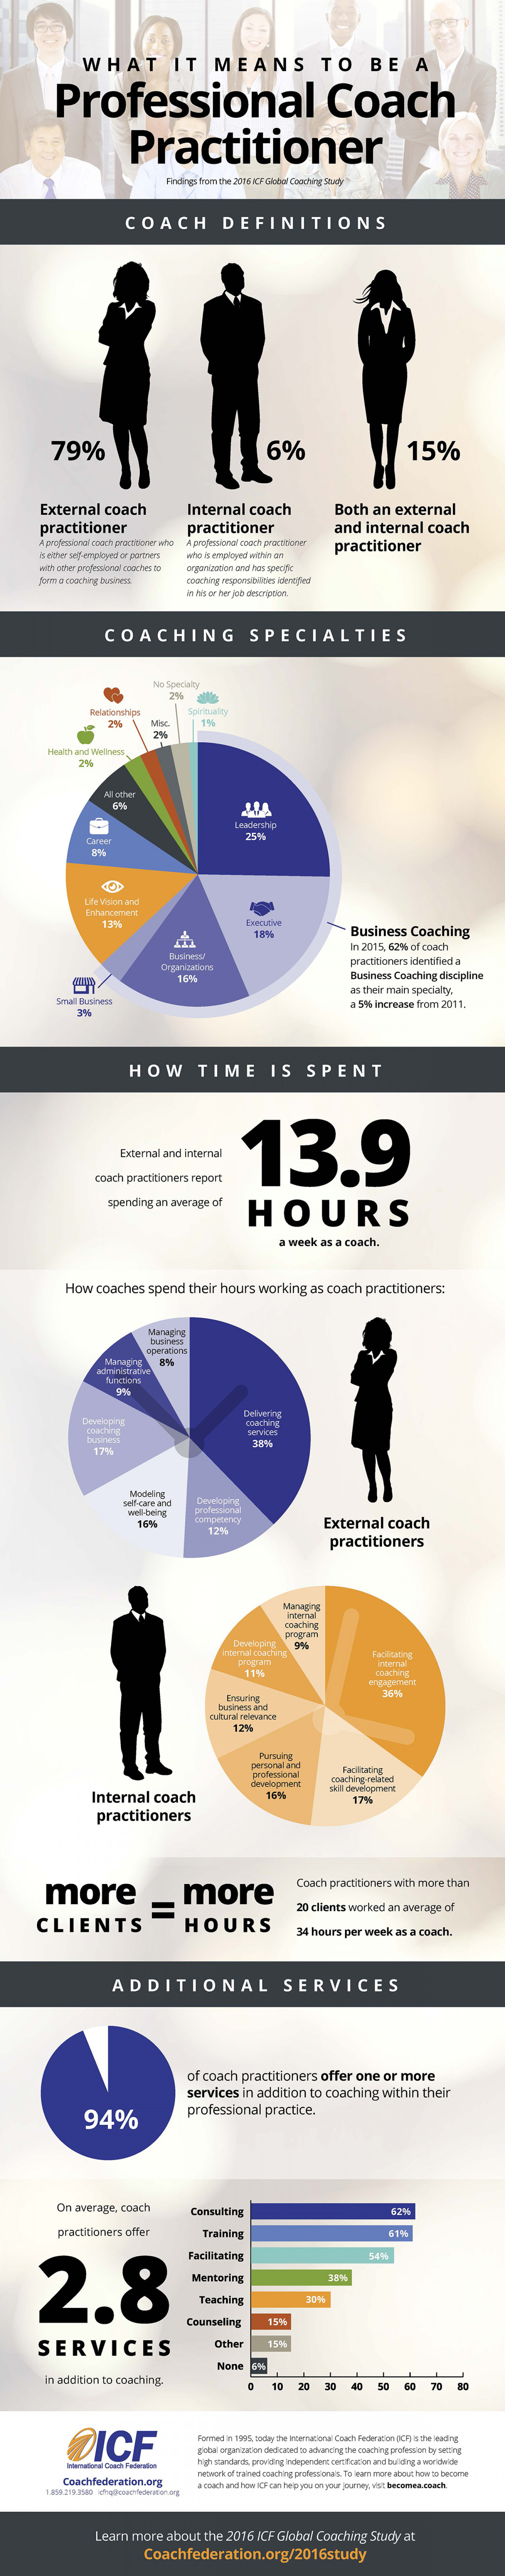 What It Means to be a Professional Coach Practitioner Infographic